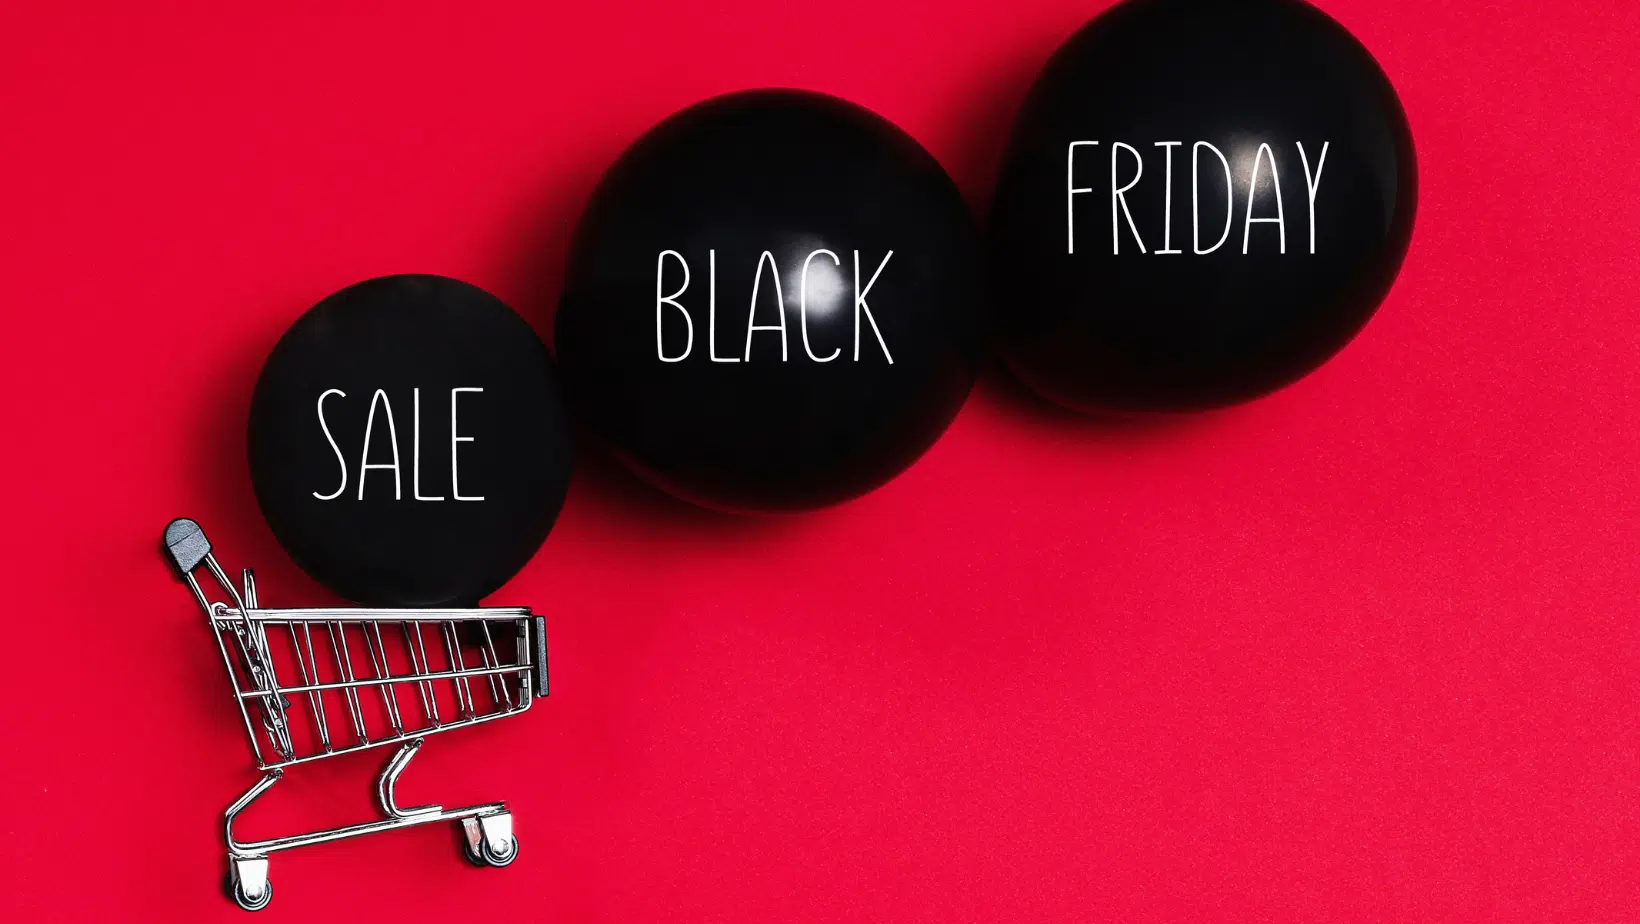 Where The Best And Worst Deals Are This Black Friday...